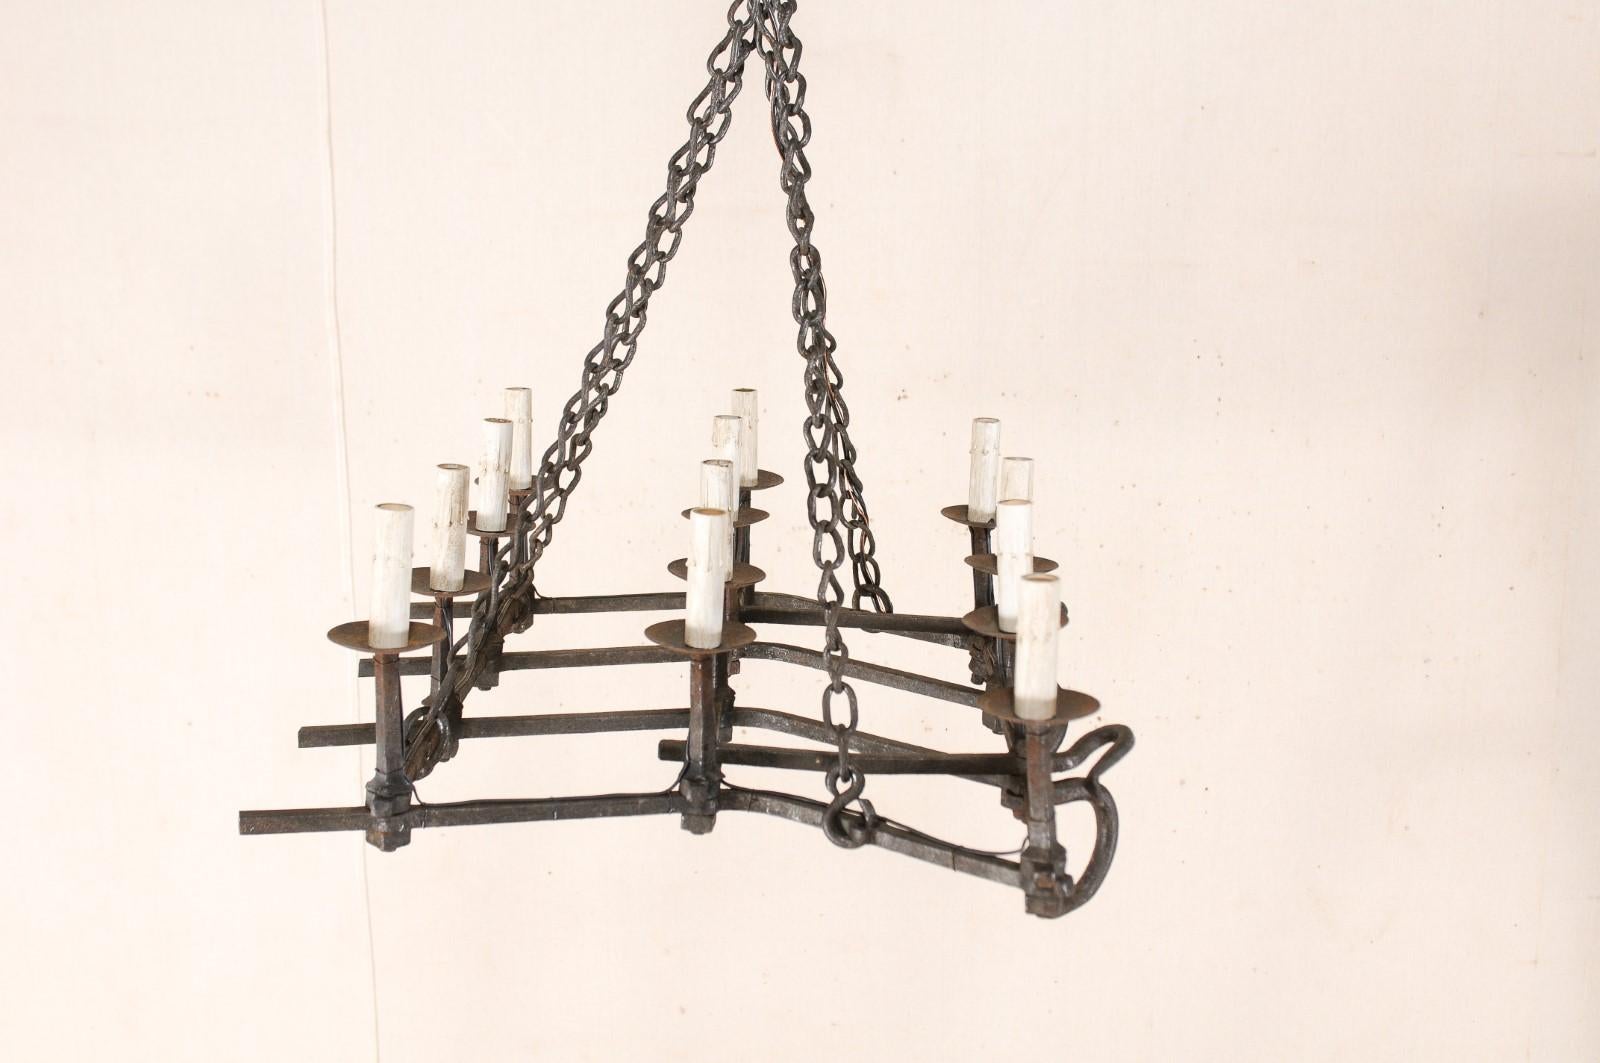 French Forged-Iron 12-Light Chandelier, Unique Shape from Old Farming Implement  For Sale 5